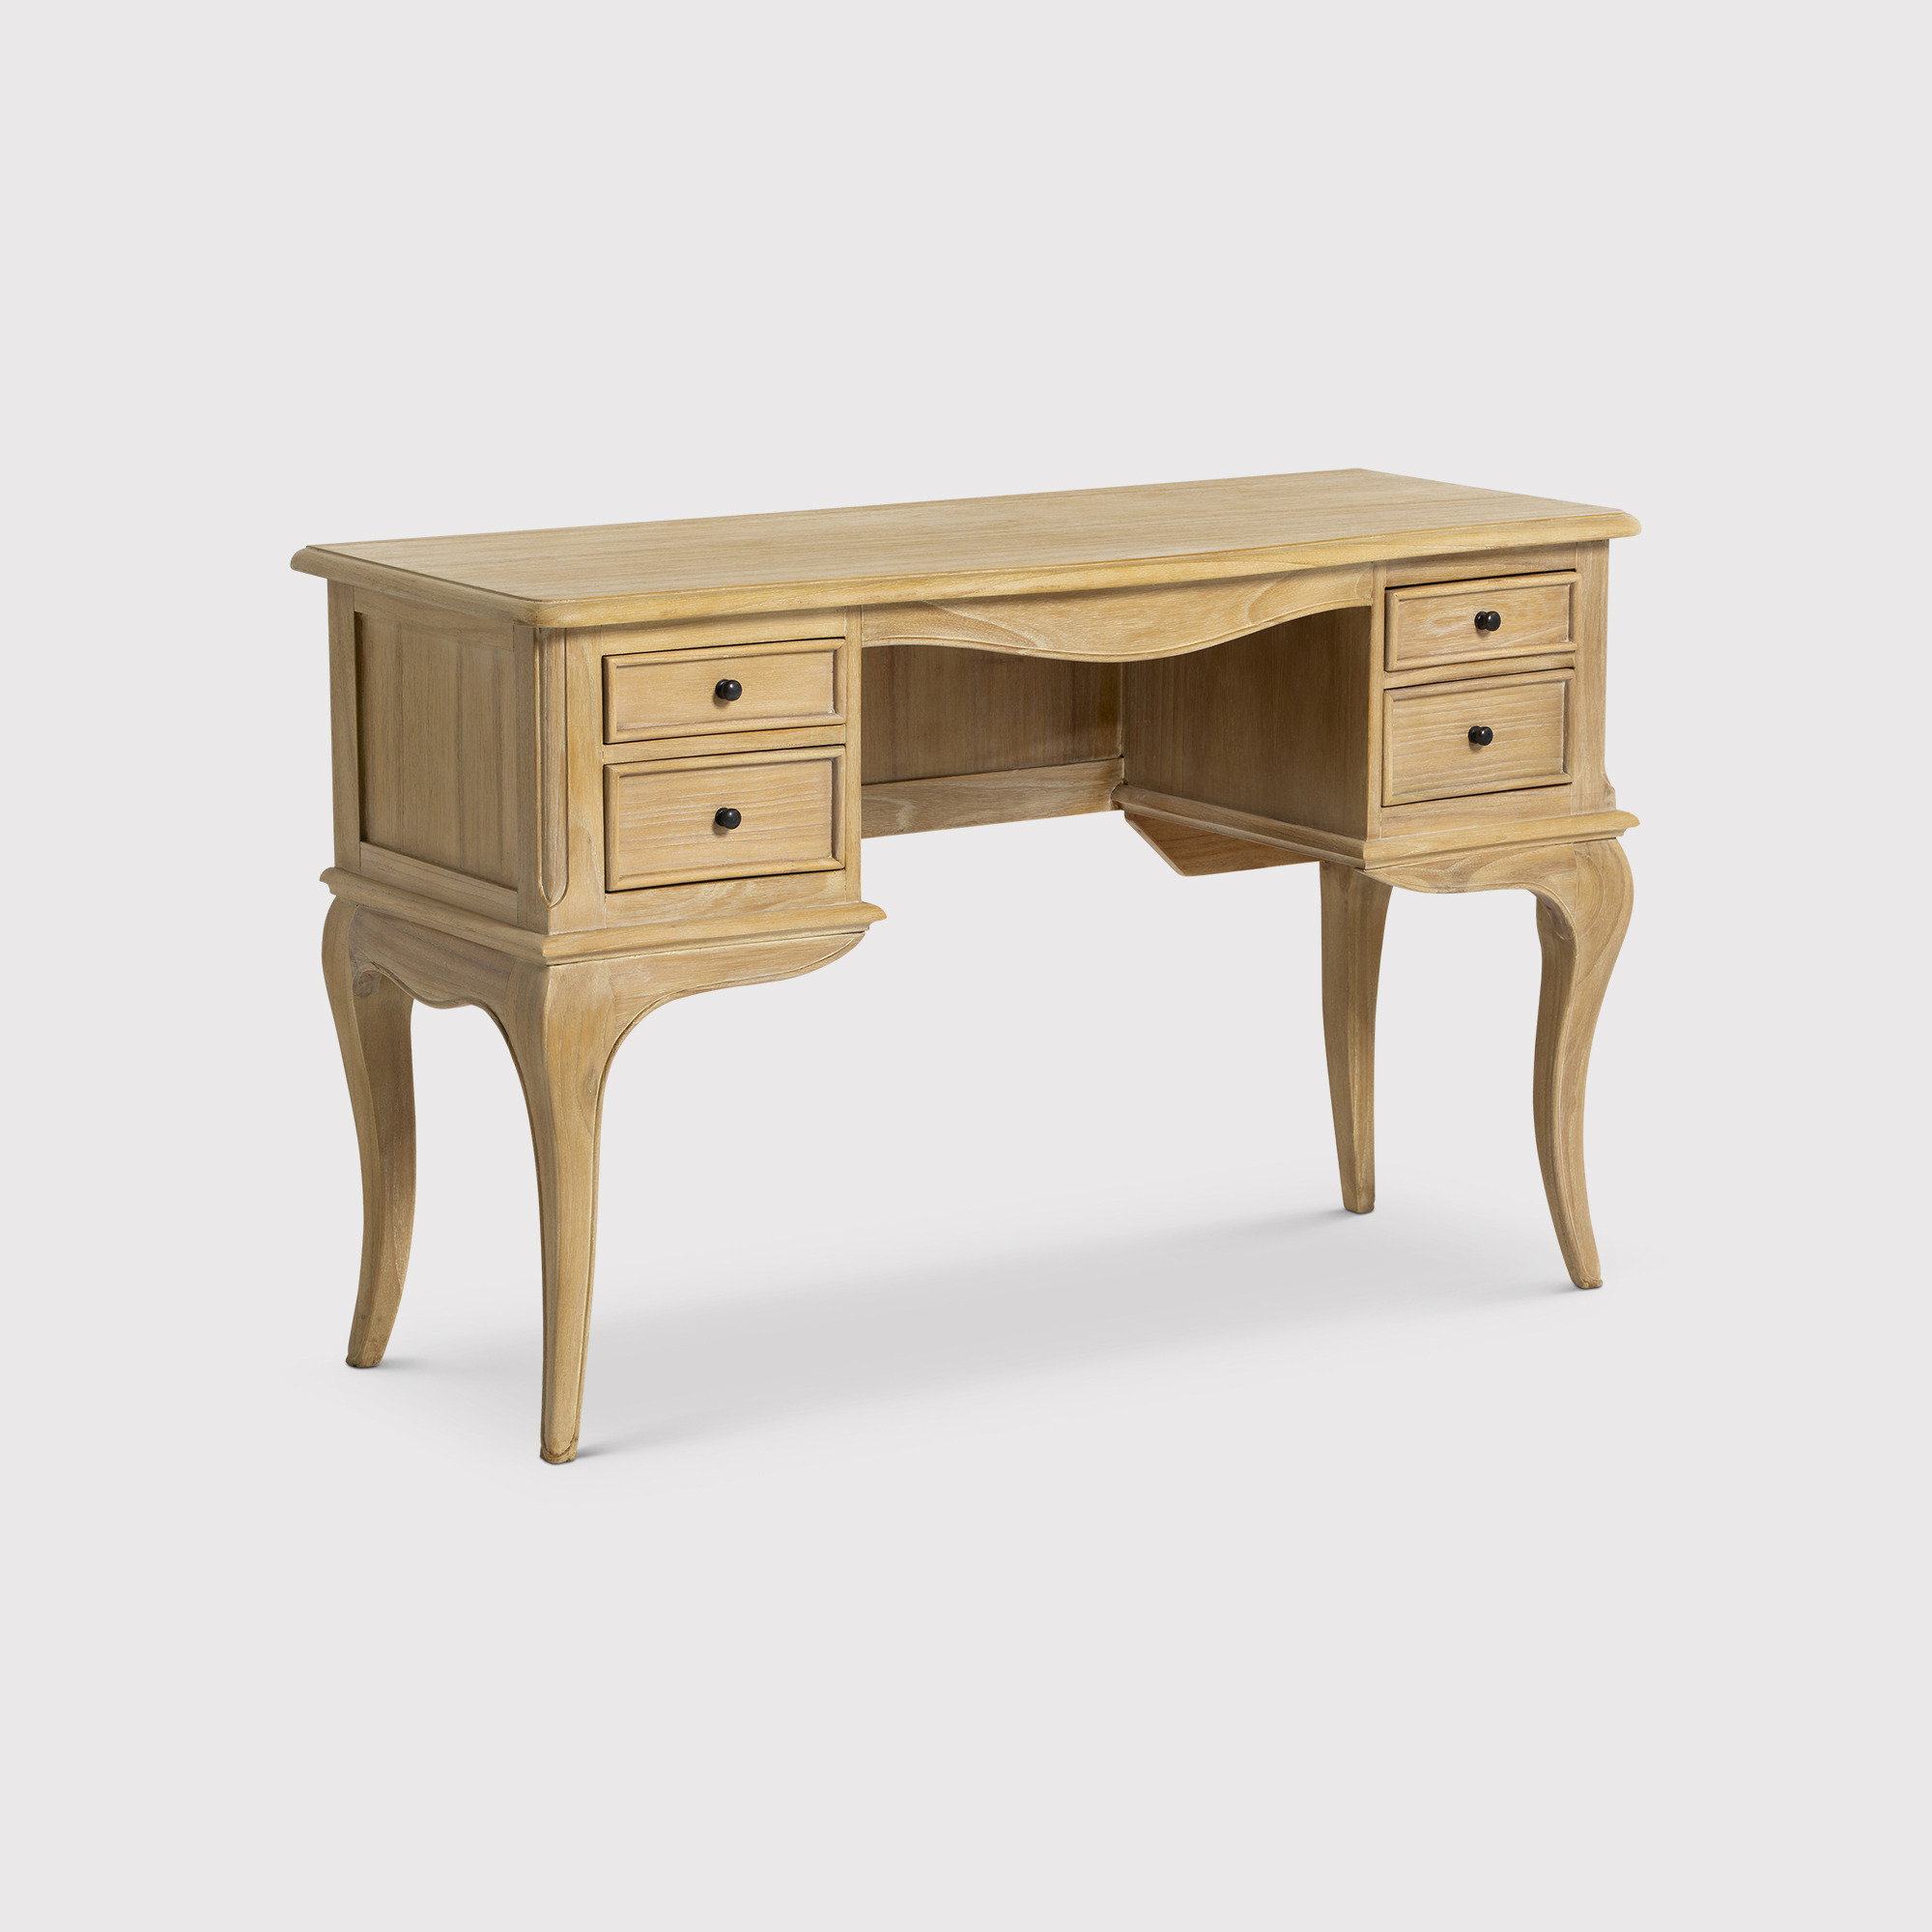 Cecile Dressing Table, Neutral Wood - Barker & Stonehouse - image 1